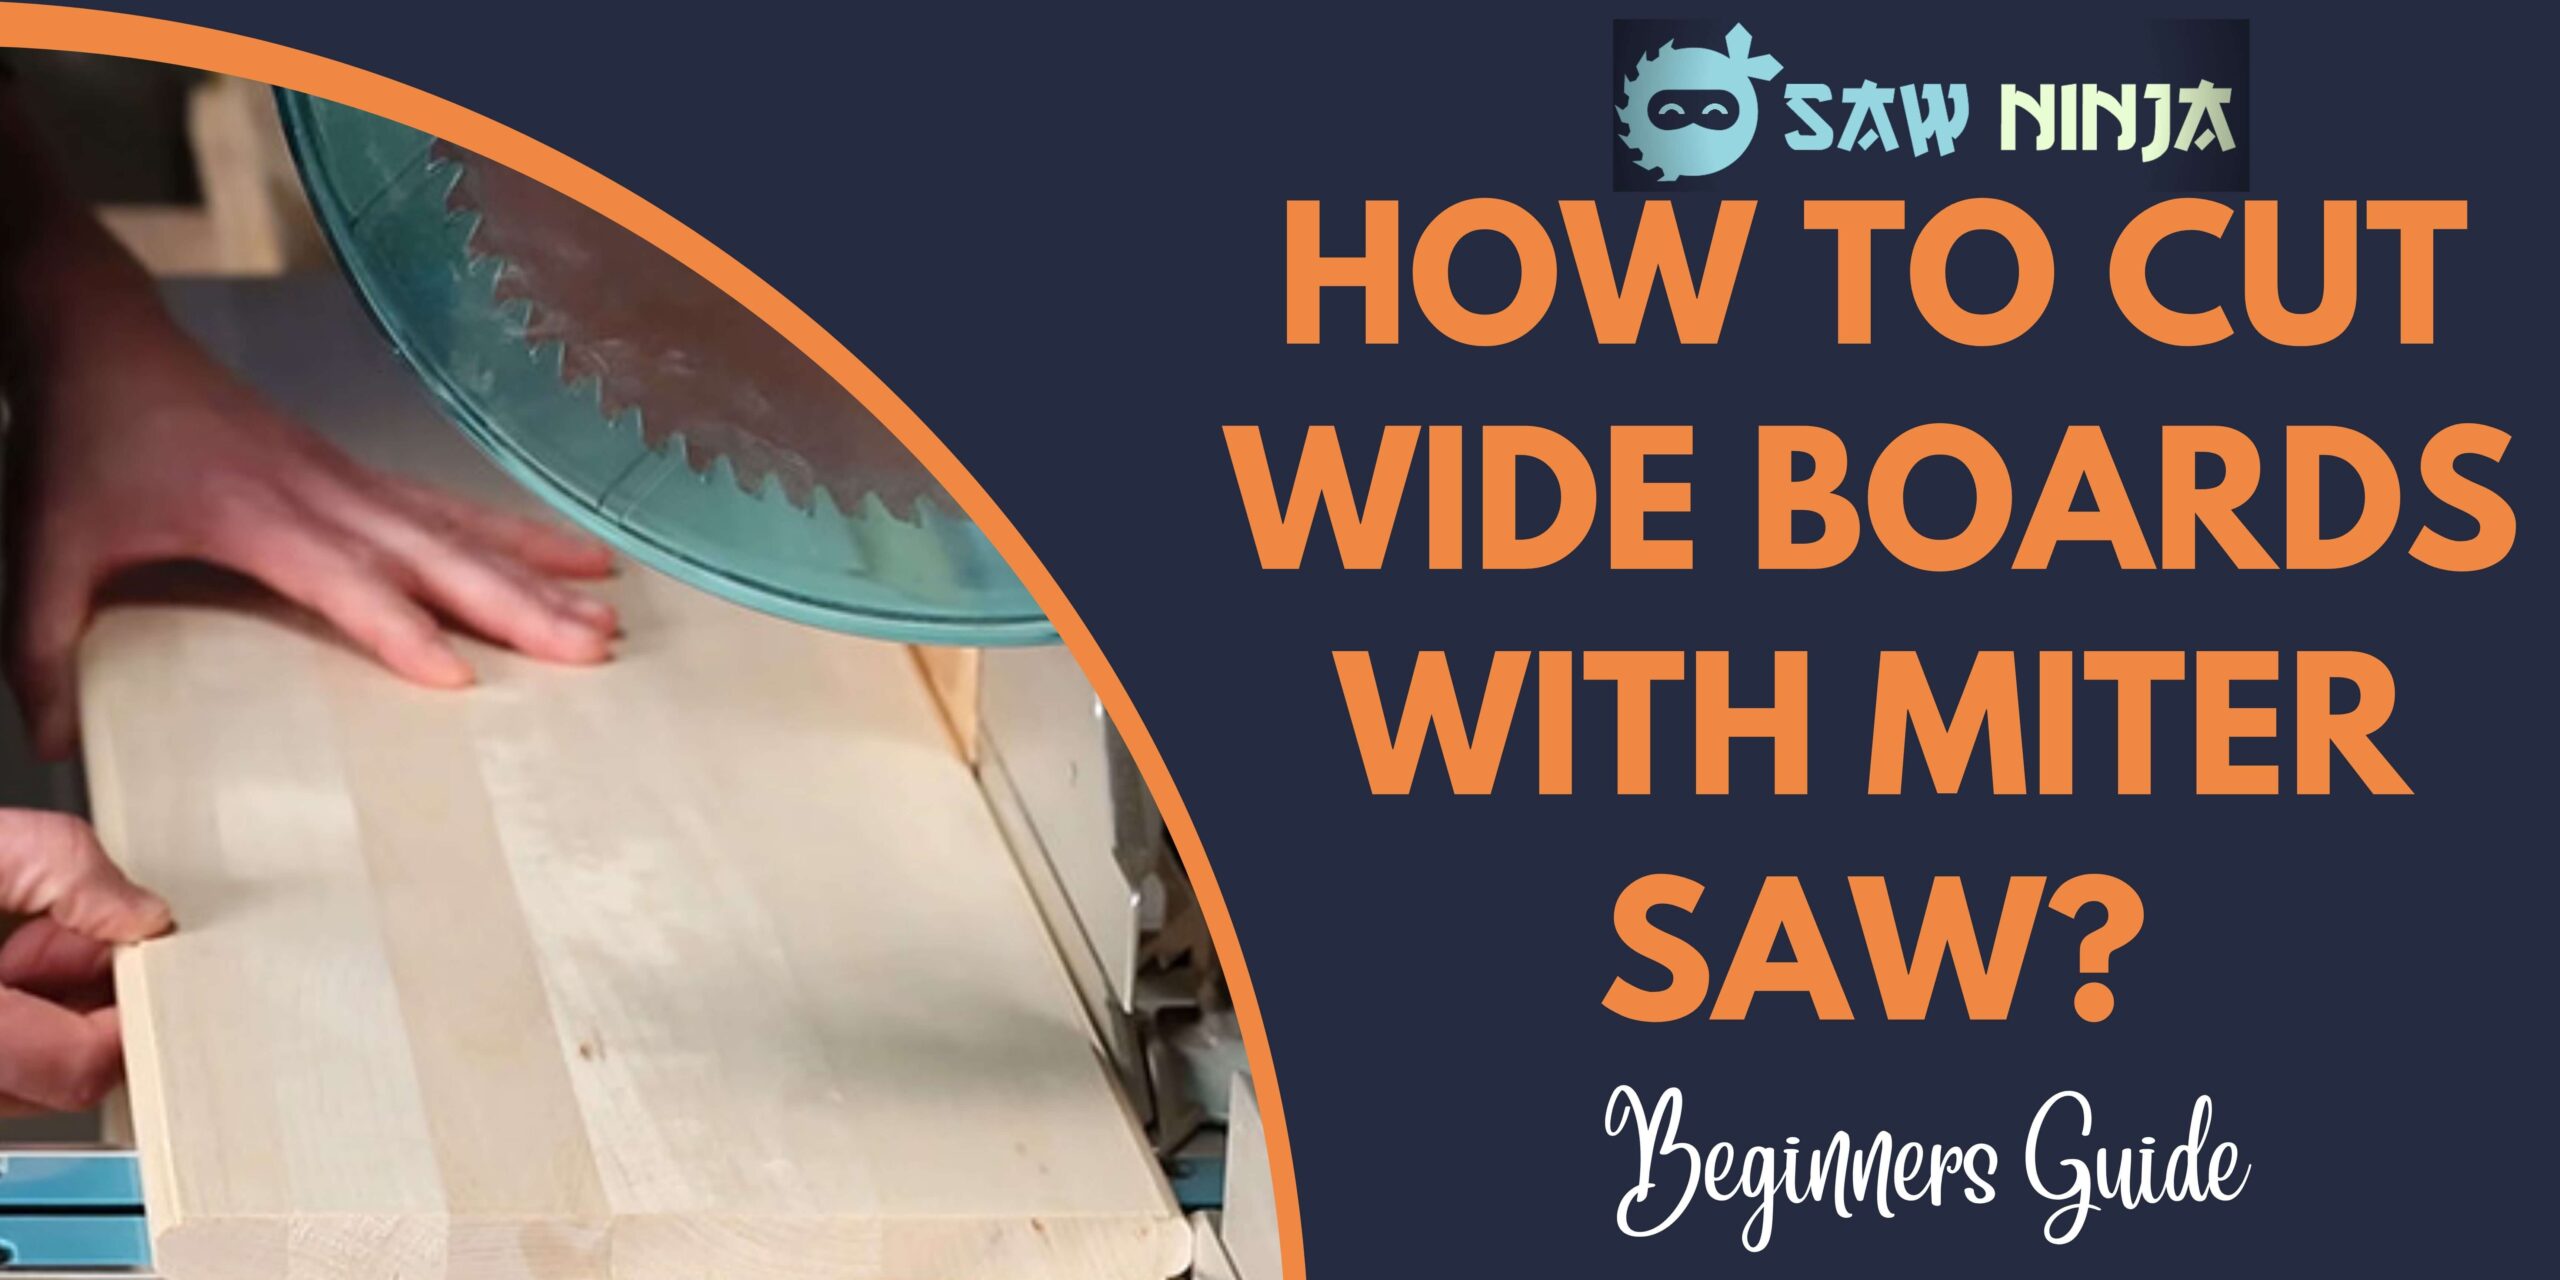 How to Cut Wide Boards With Miter Saw